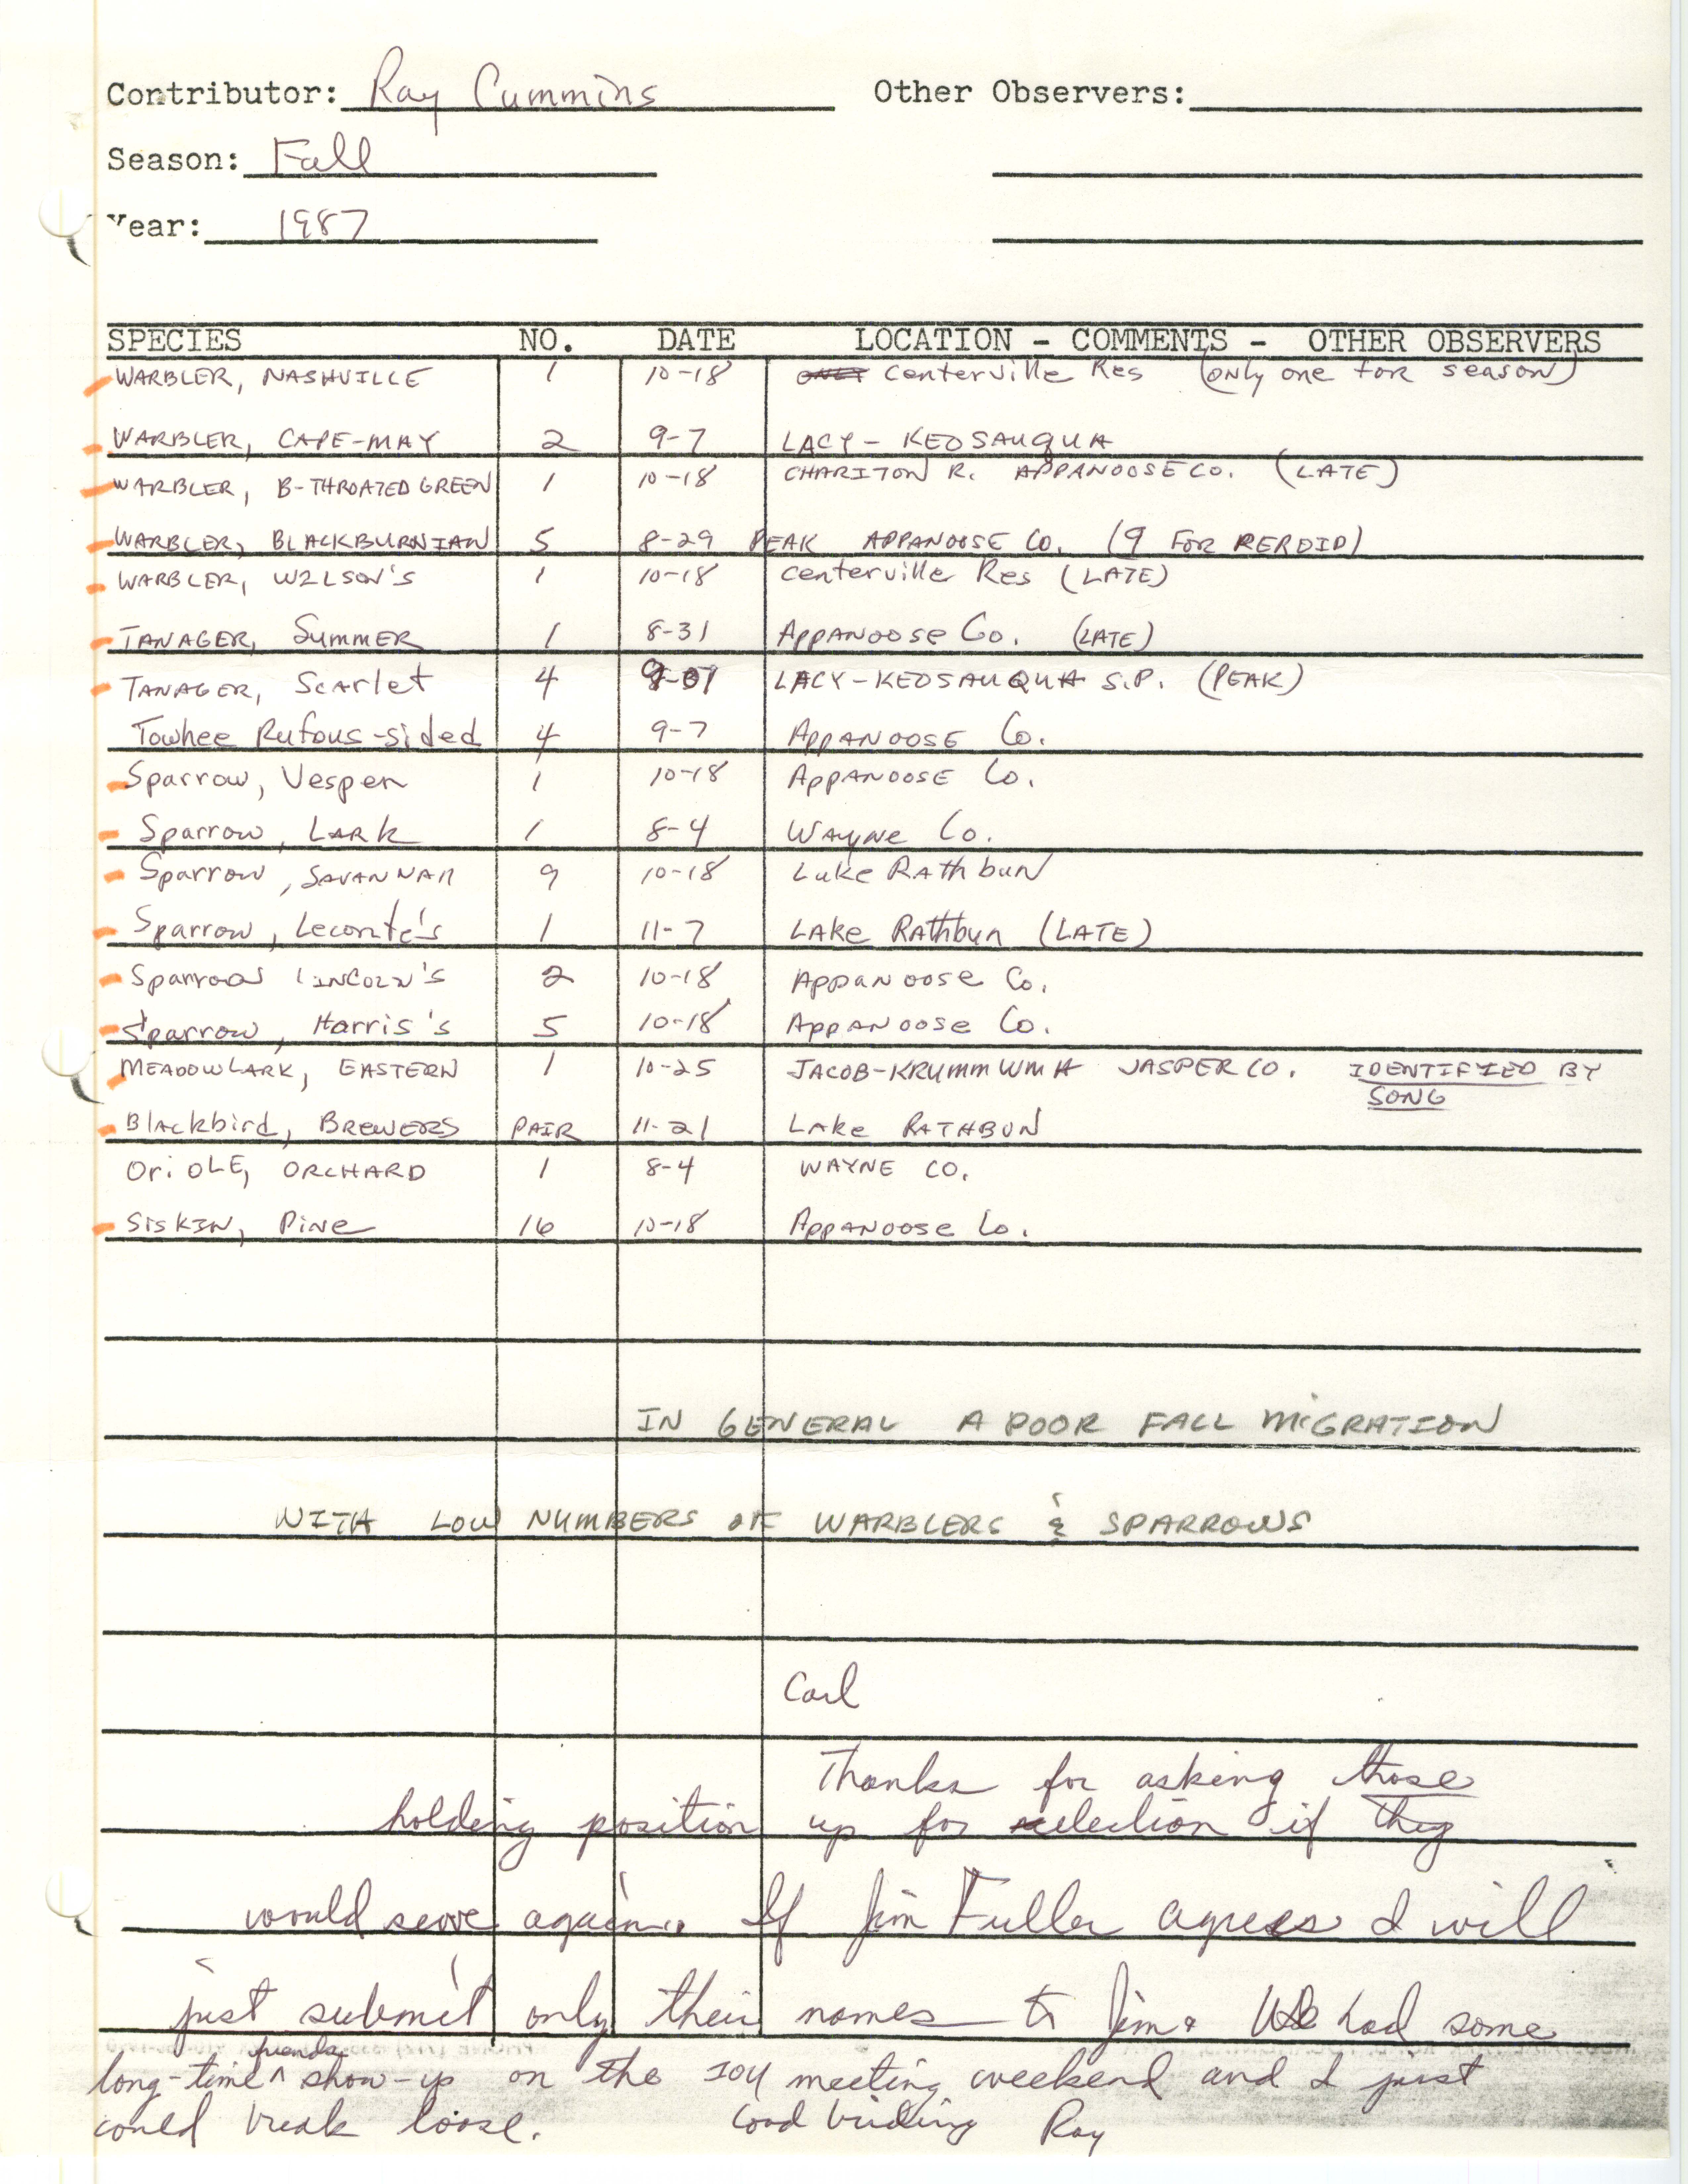 Field notes contributed by Raymond L. Cummins, fall 1987